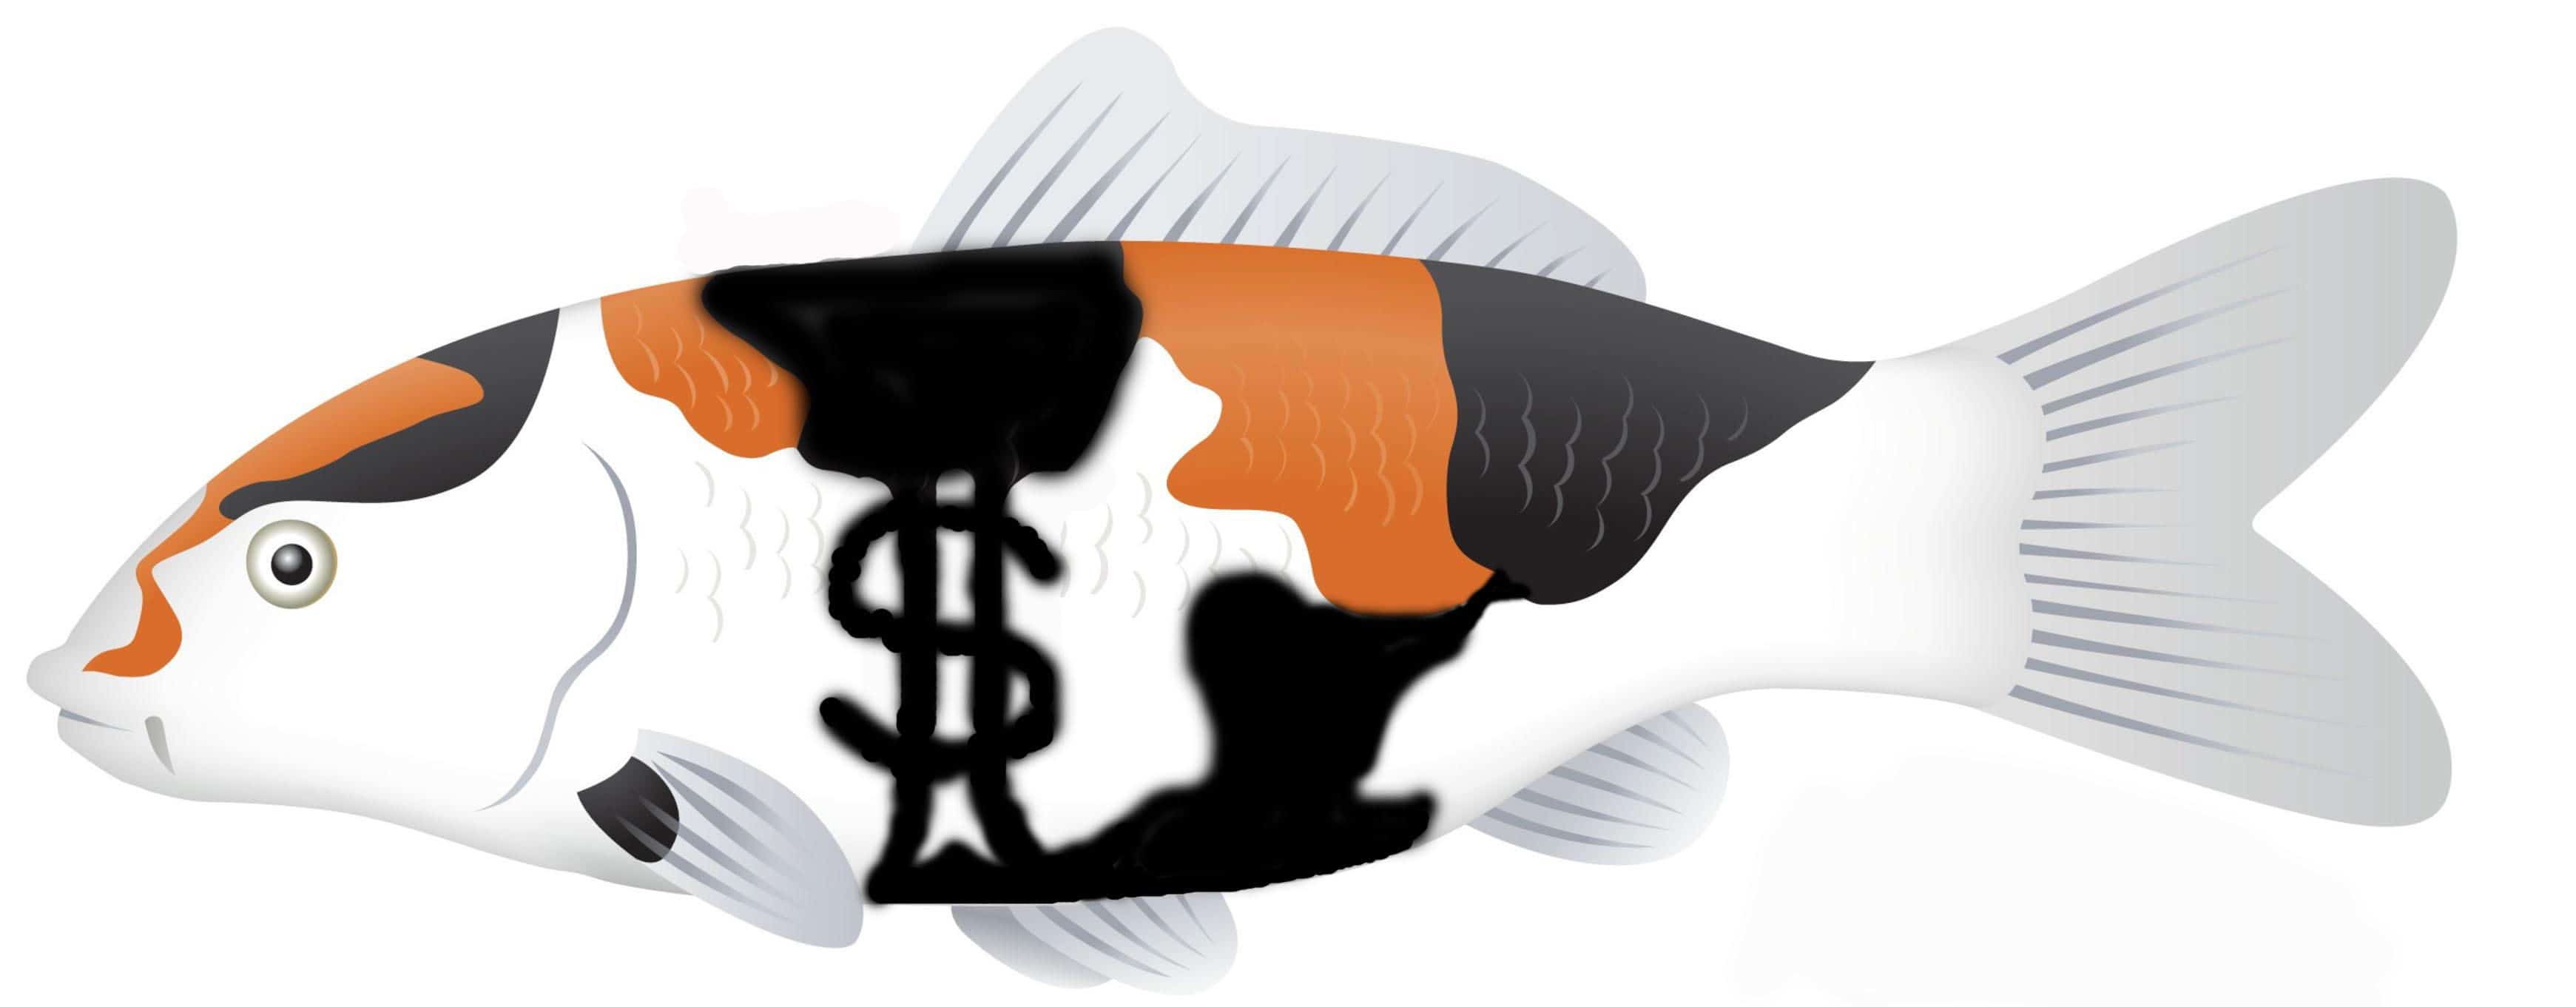 How to breed koi for profit